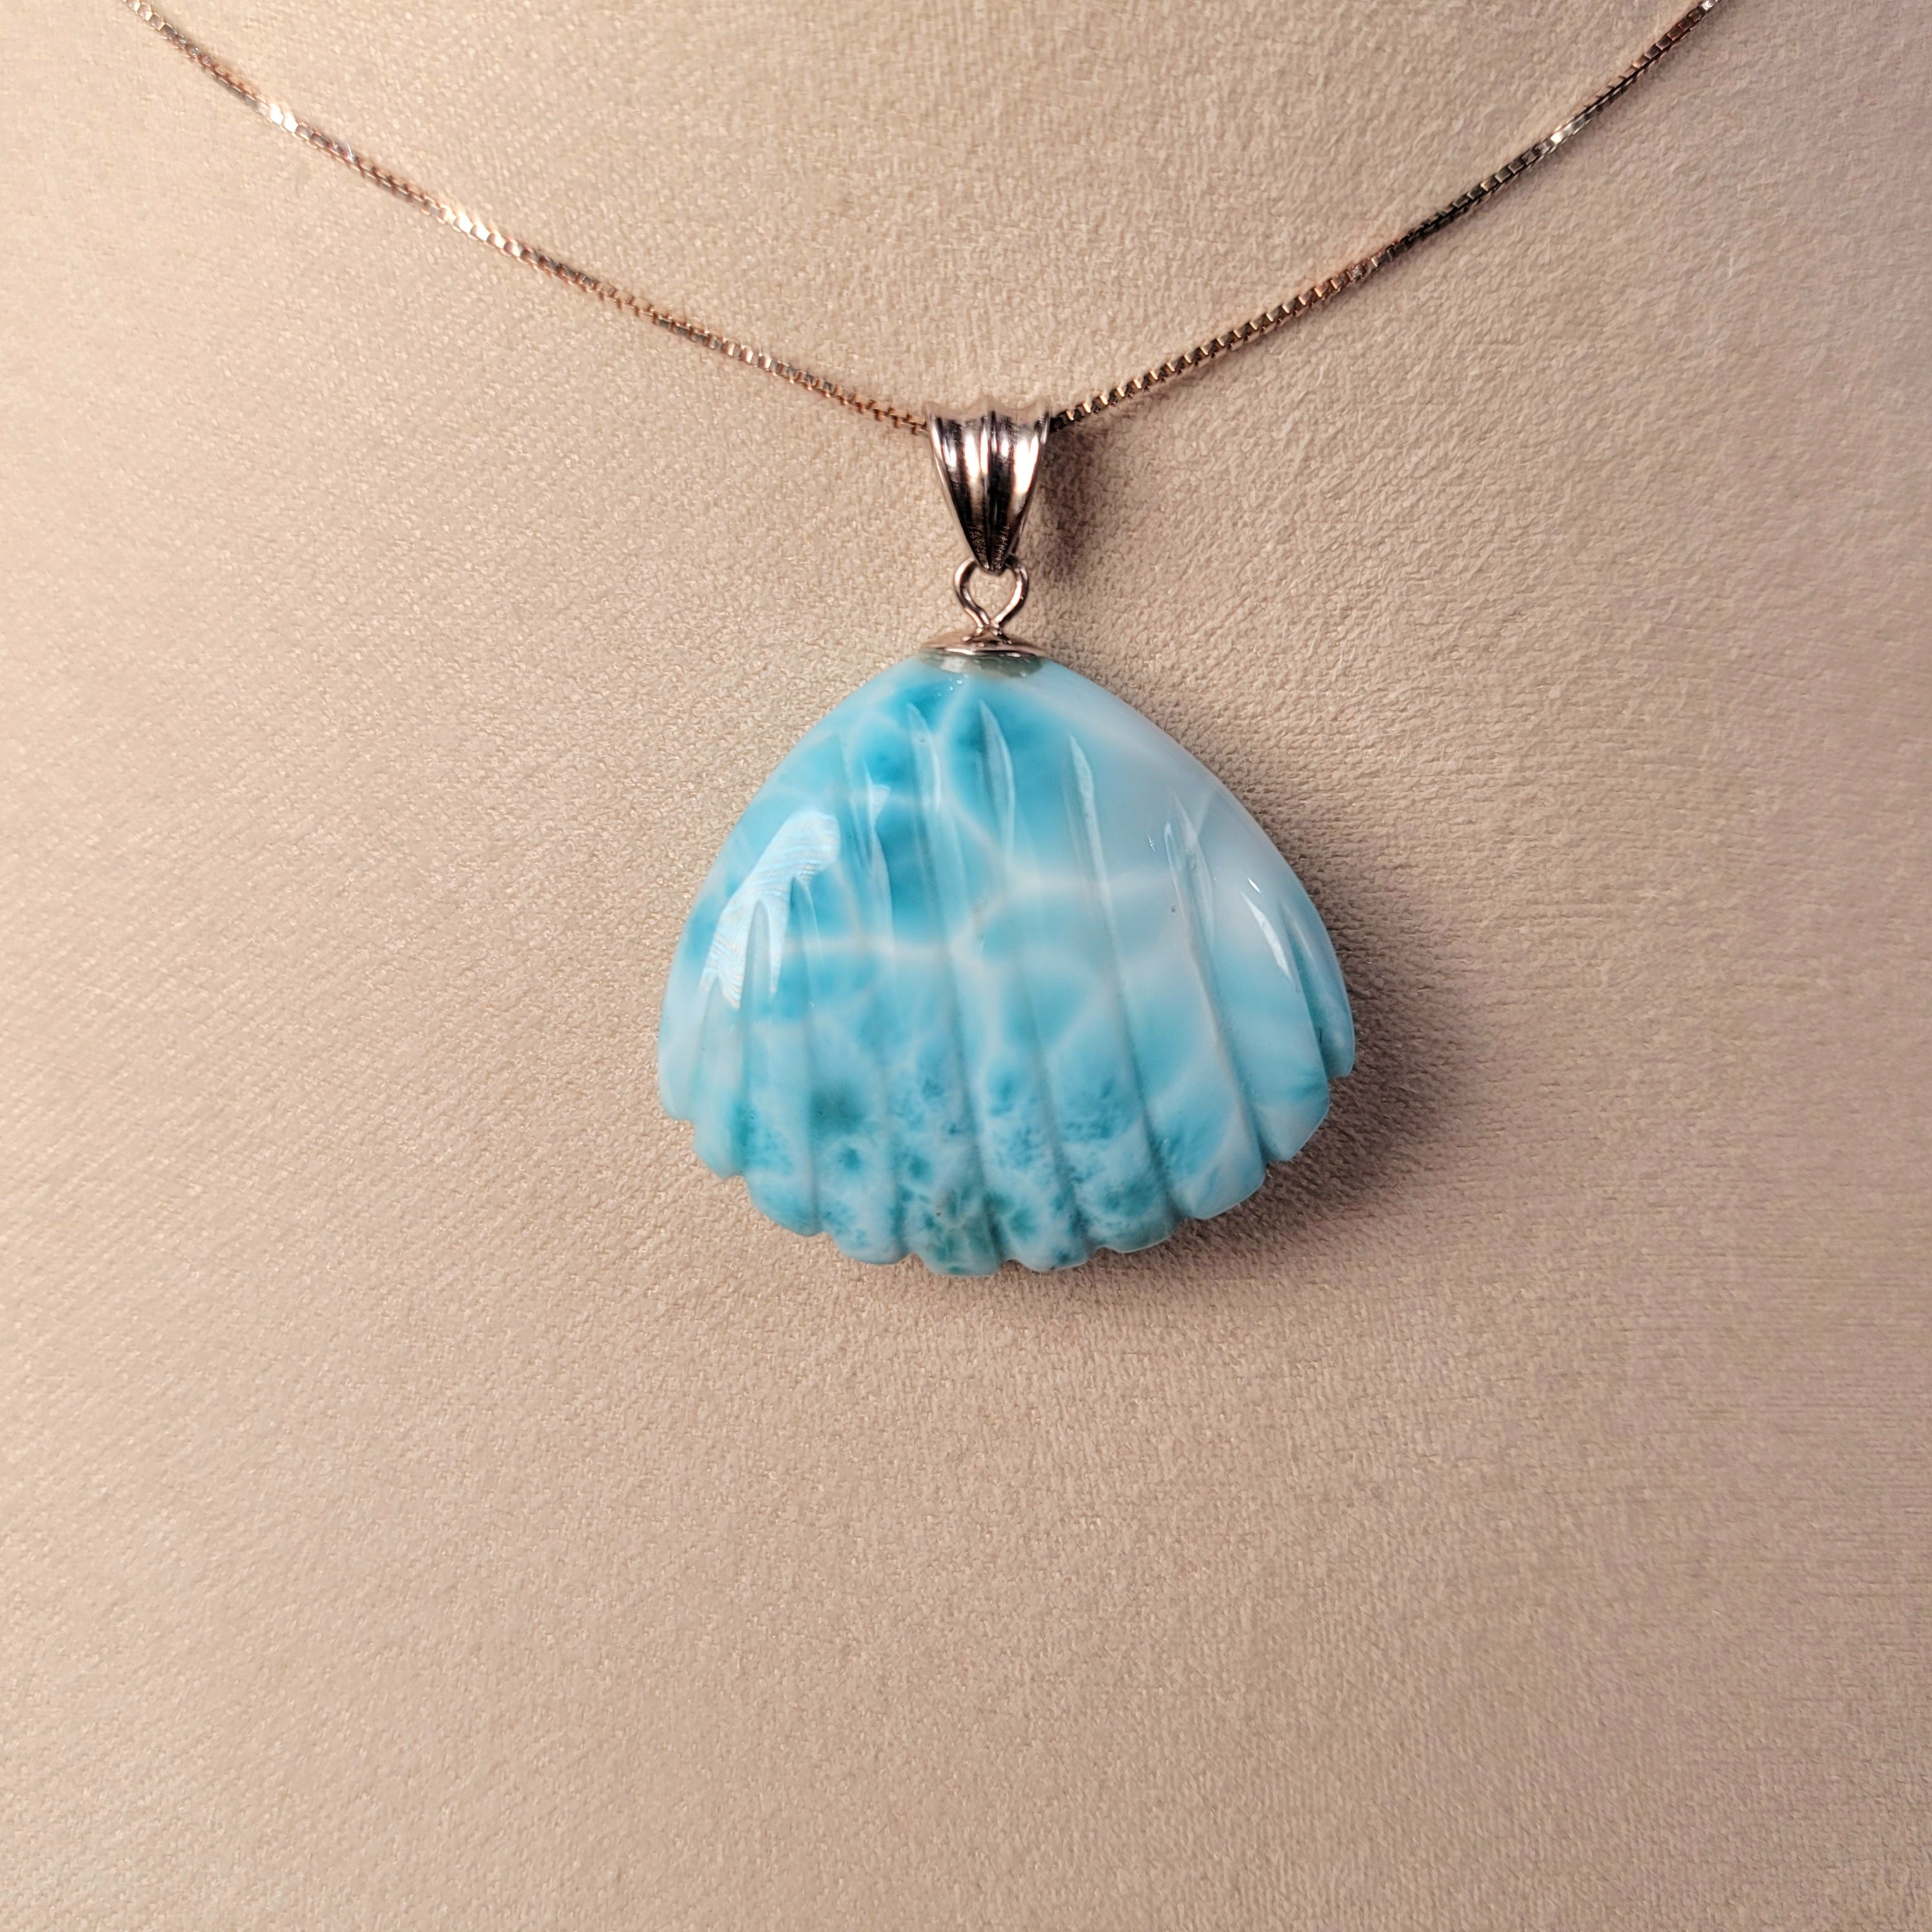 Larimar Sea Shell Carving Necklace .925. Silver for Connecting you to Mother Earth's Divine Treasures